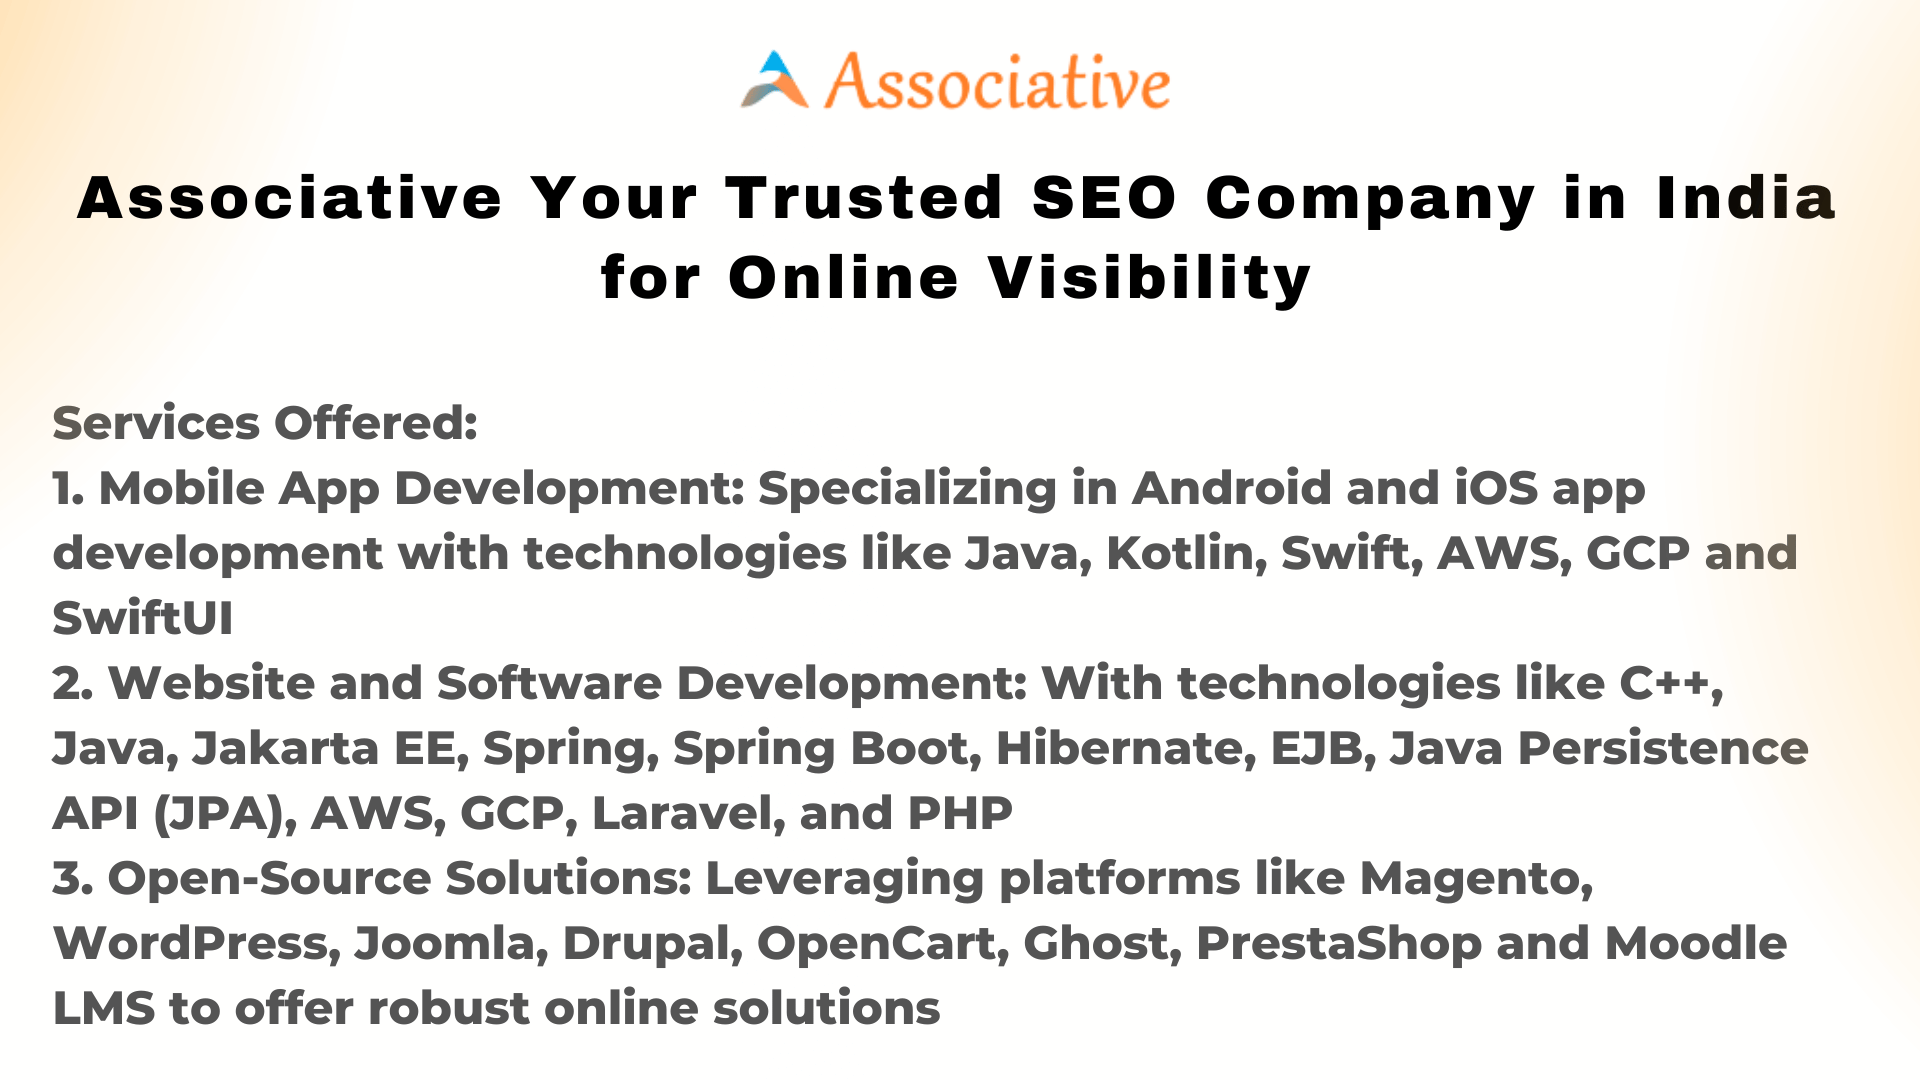 Associative Your Trusted SEO Company in India for Online Visibility